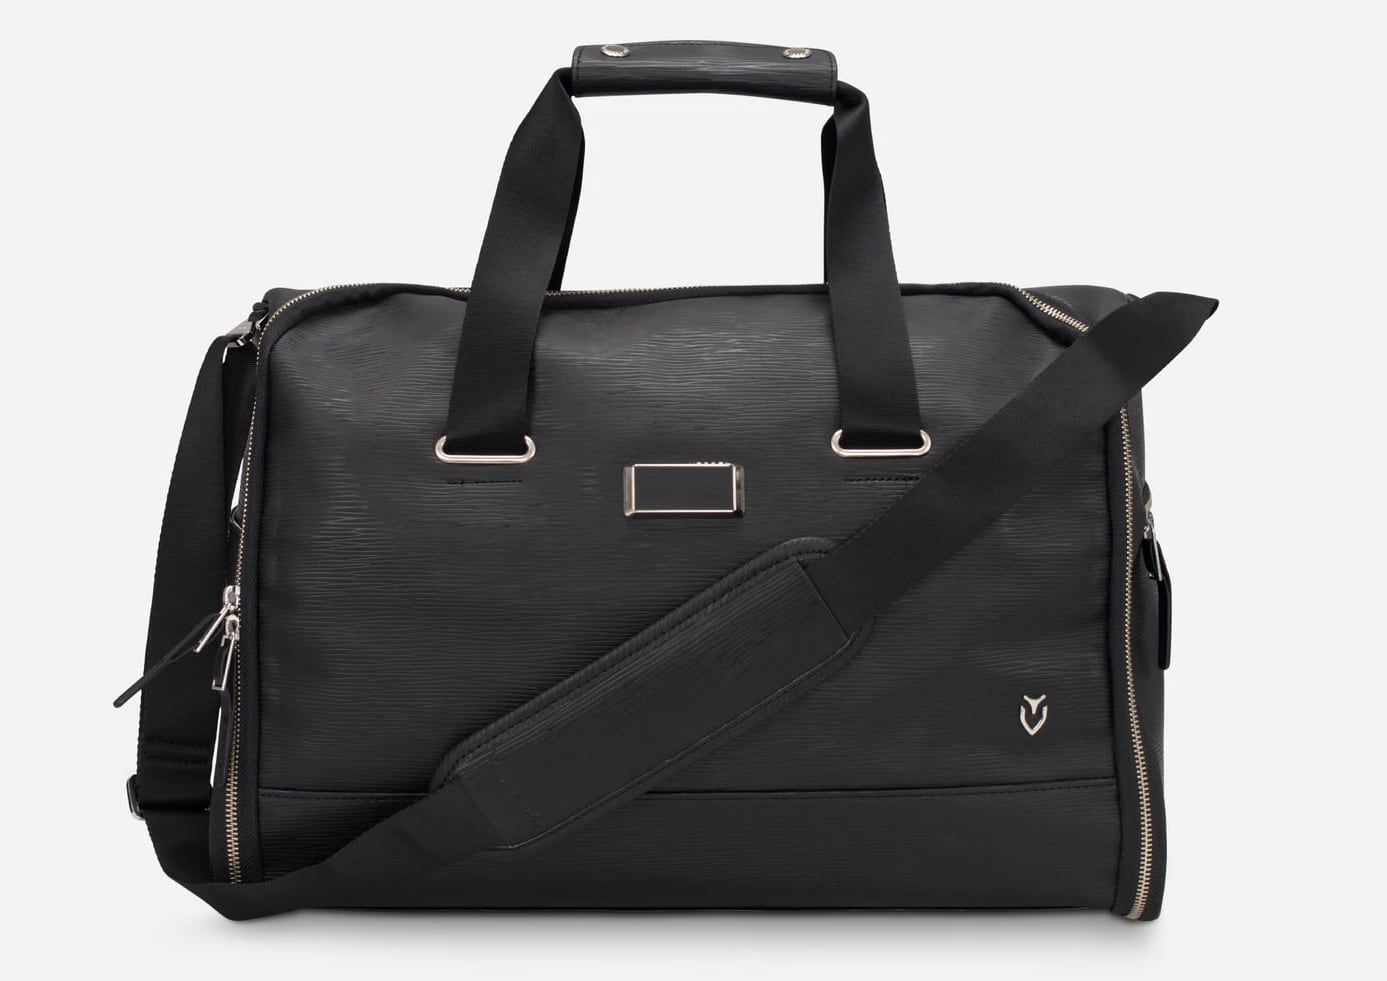 MacRumors Giveaway: Win a Weekender Bag and Backpack From Vessel